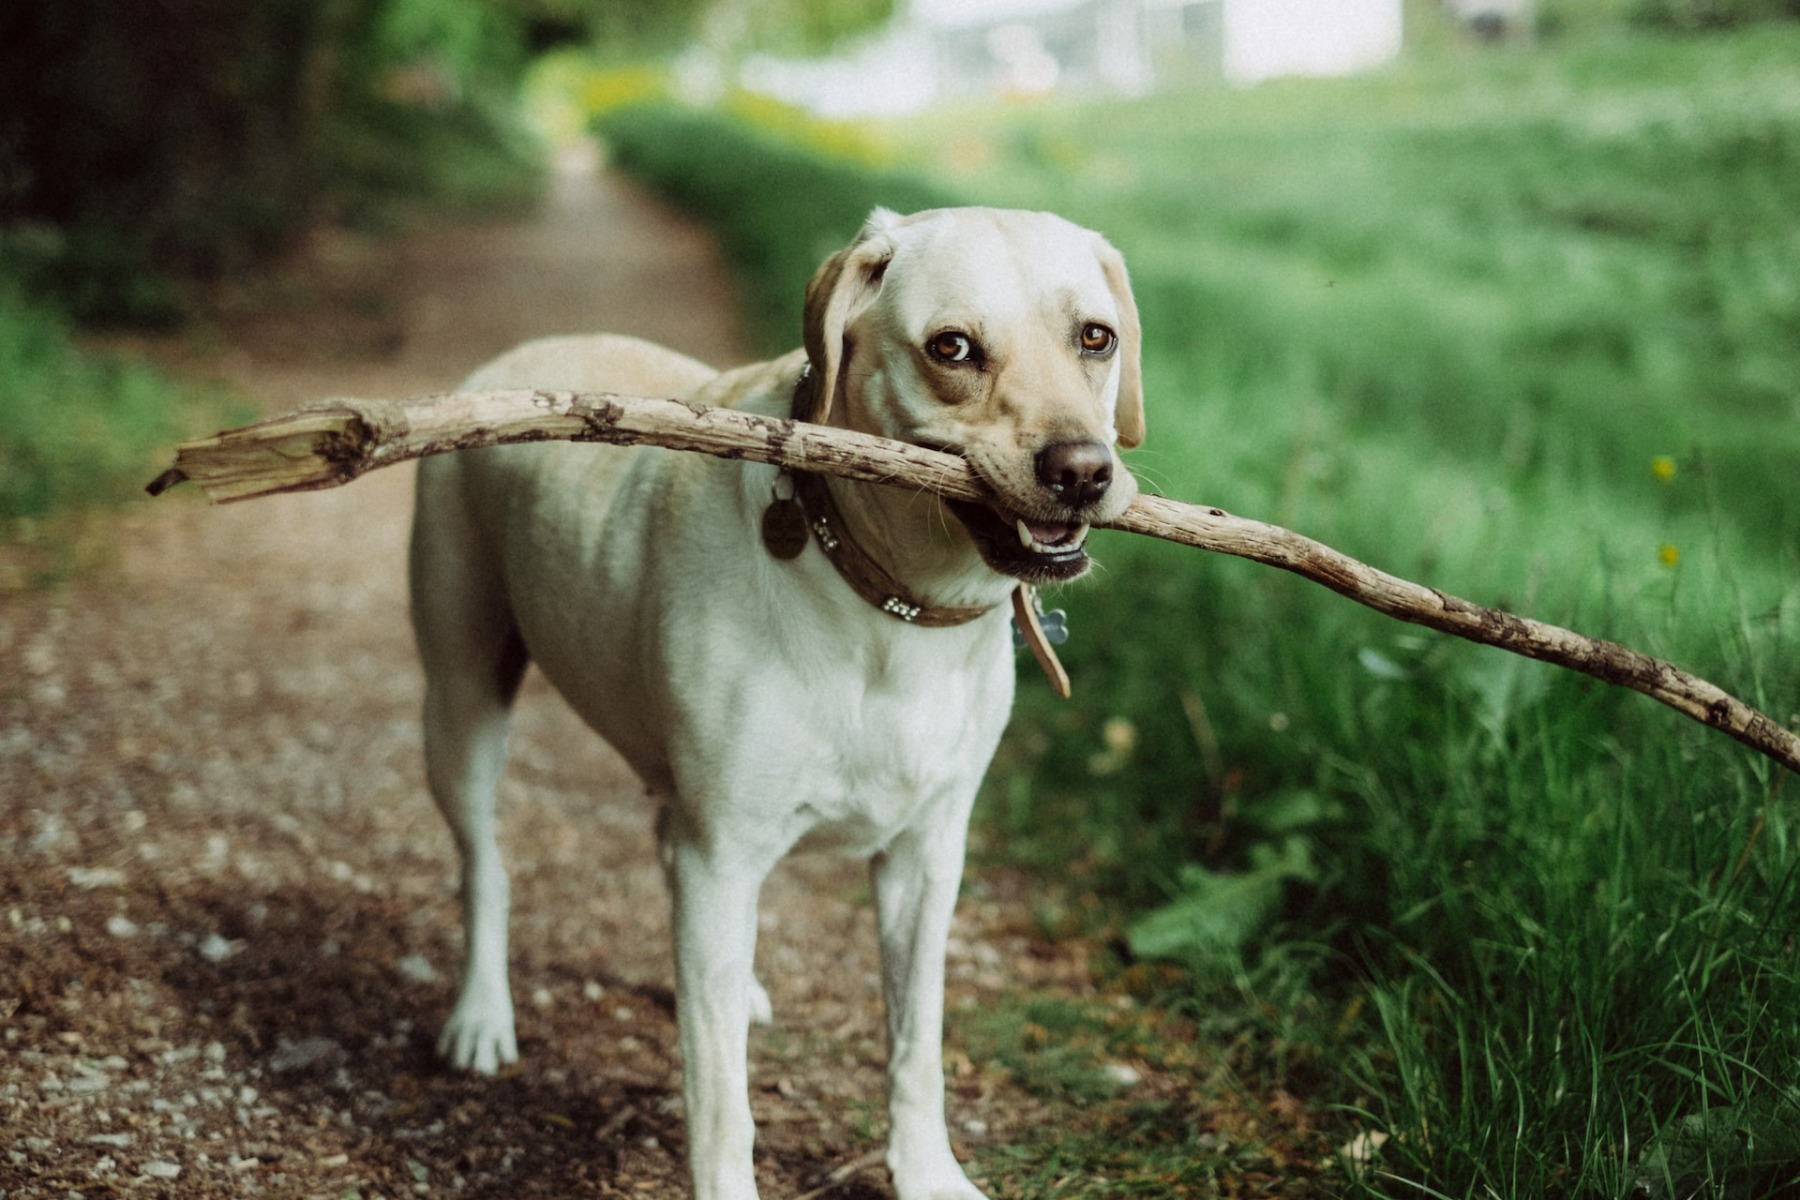 dog on walk holding stick in mouth